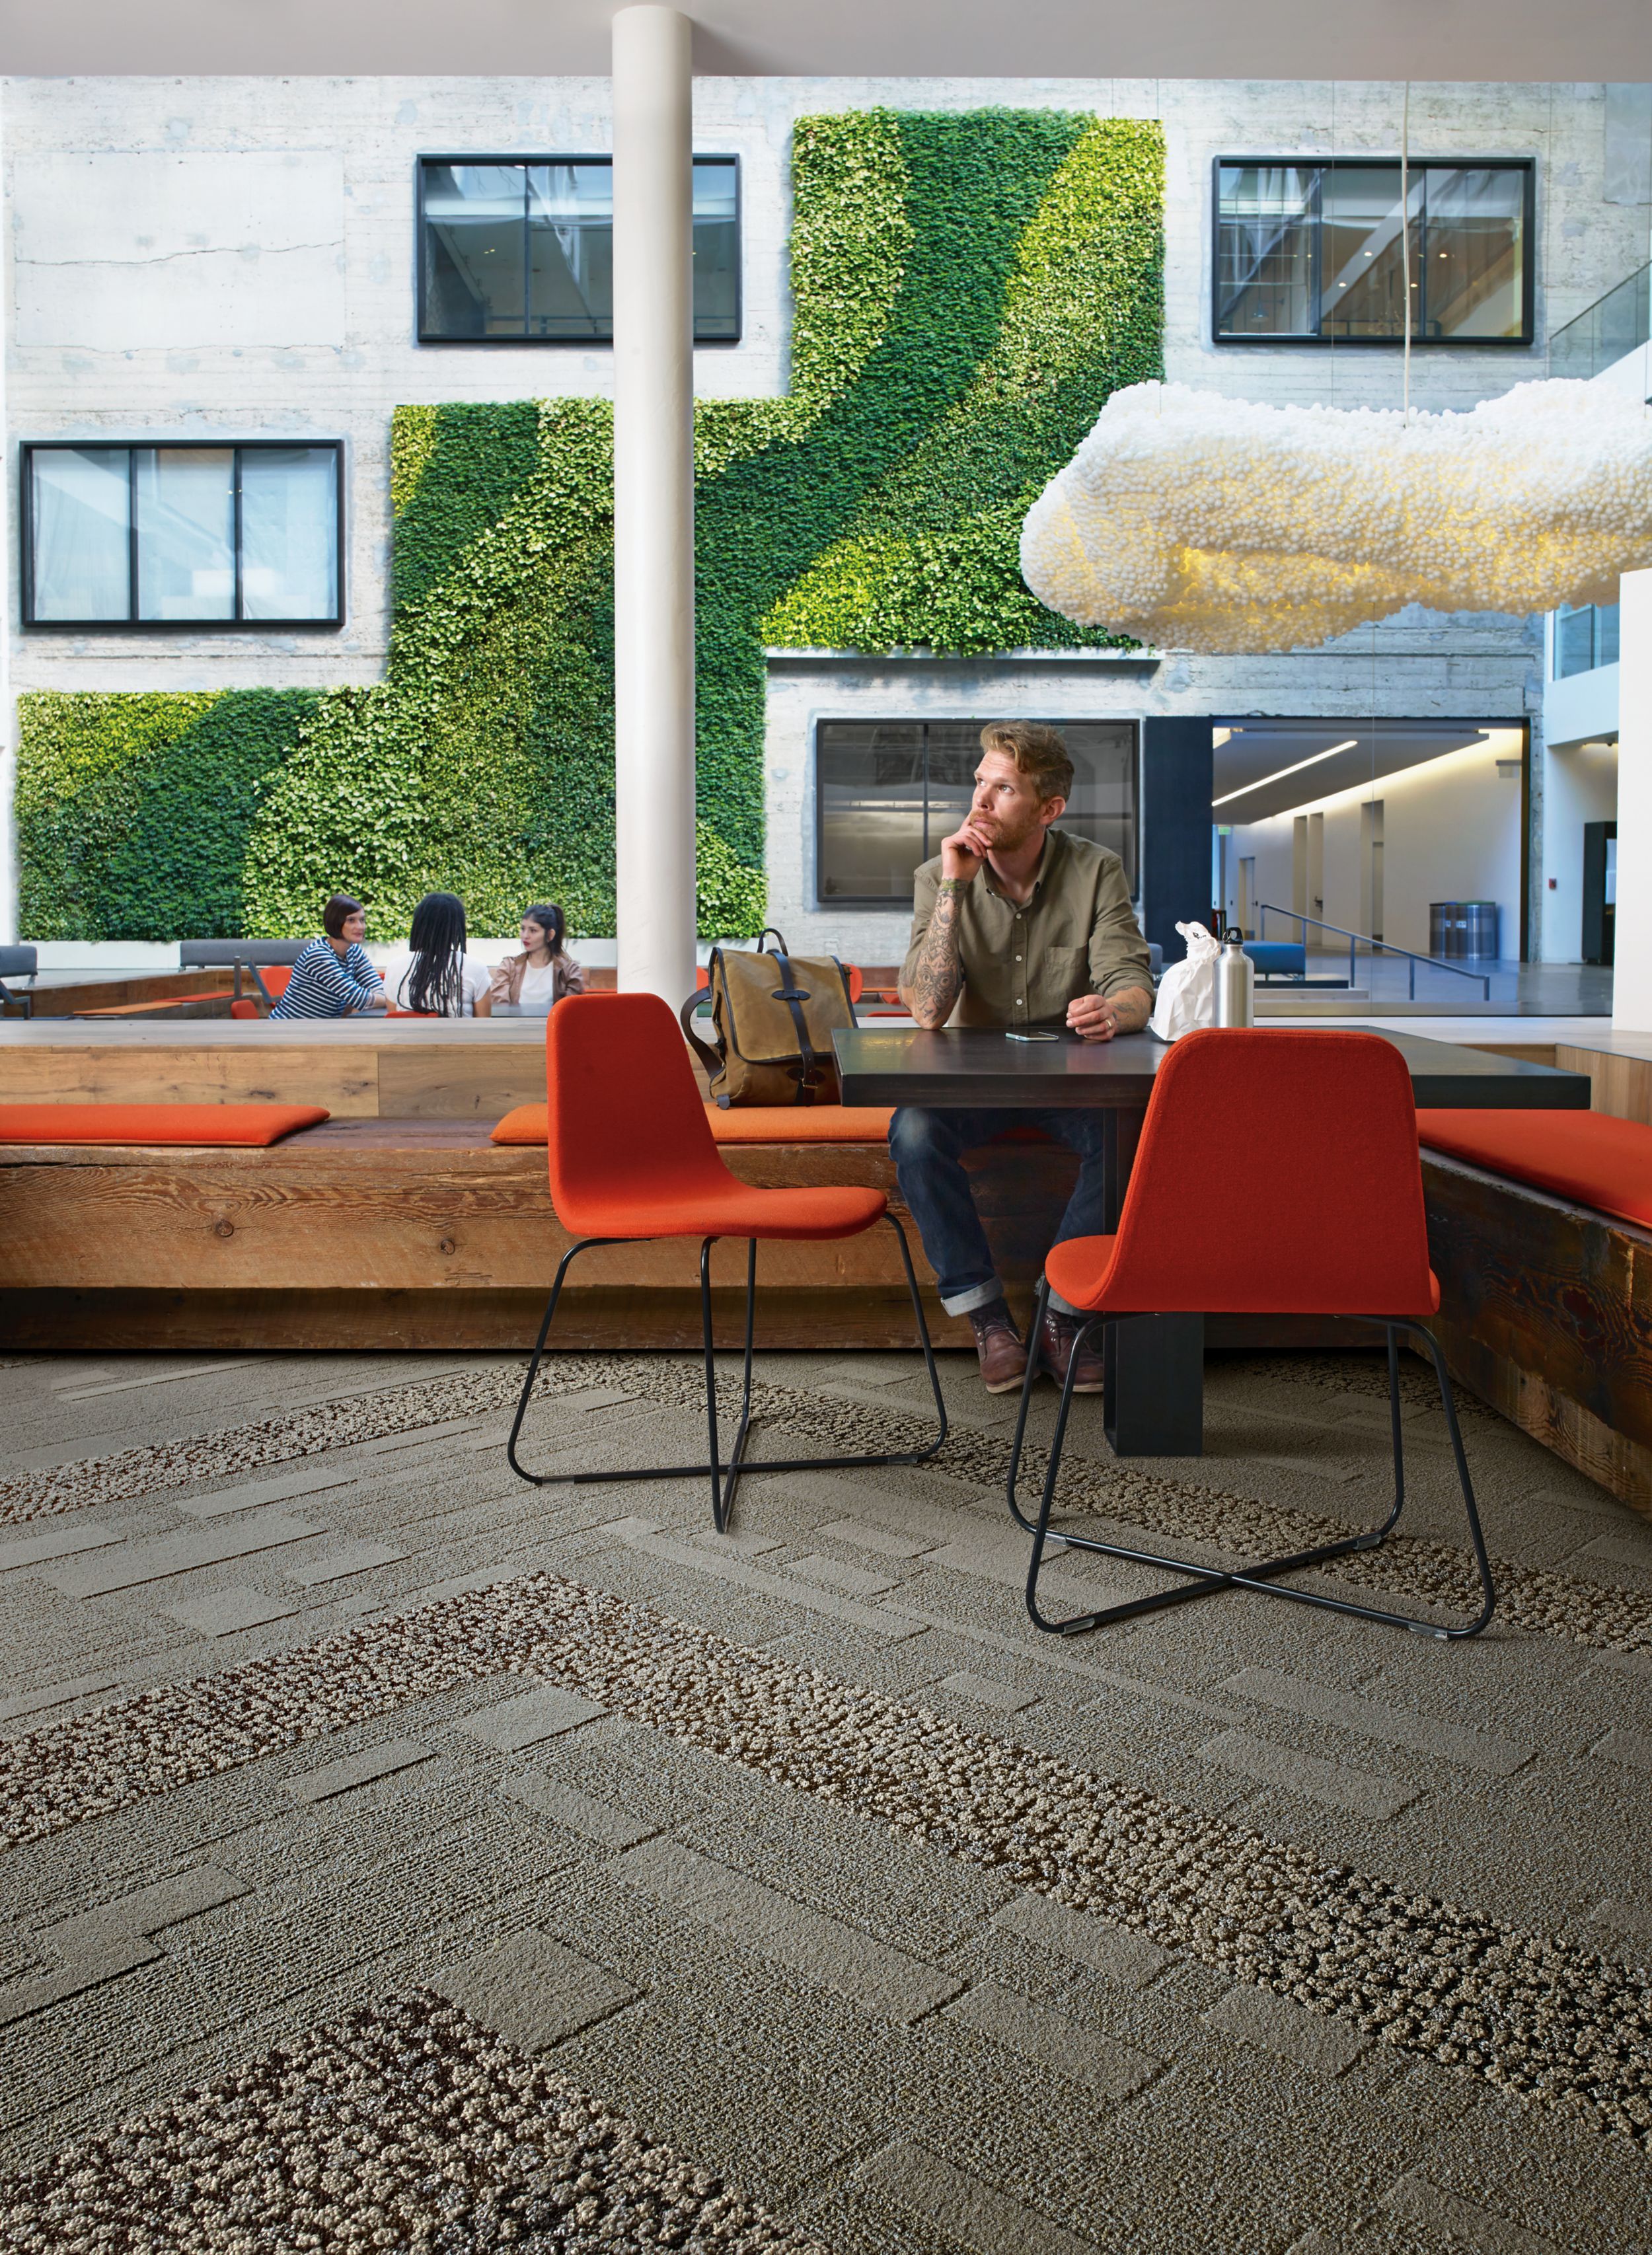 Interface EM552 plank carpet tile with man sitting at table with lunch and group meeting in front of vine wall in the background  imagen número 3